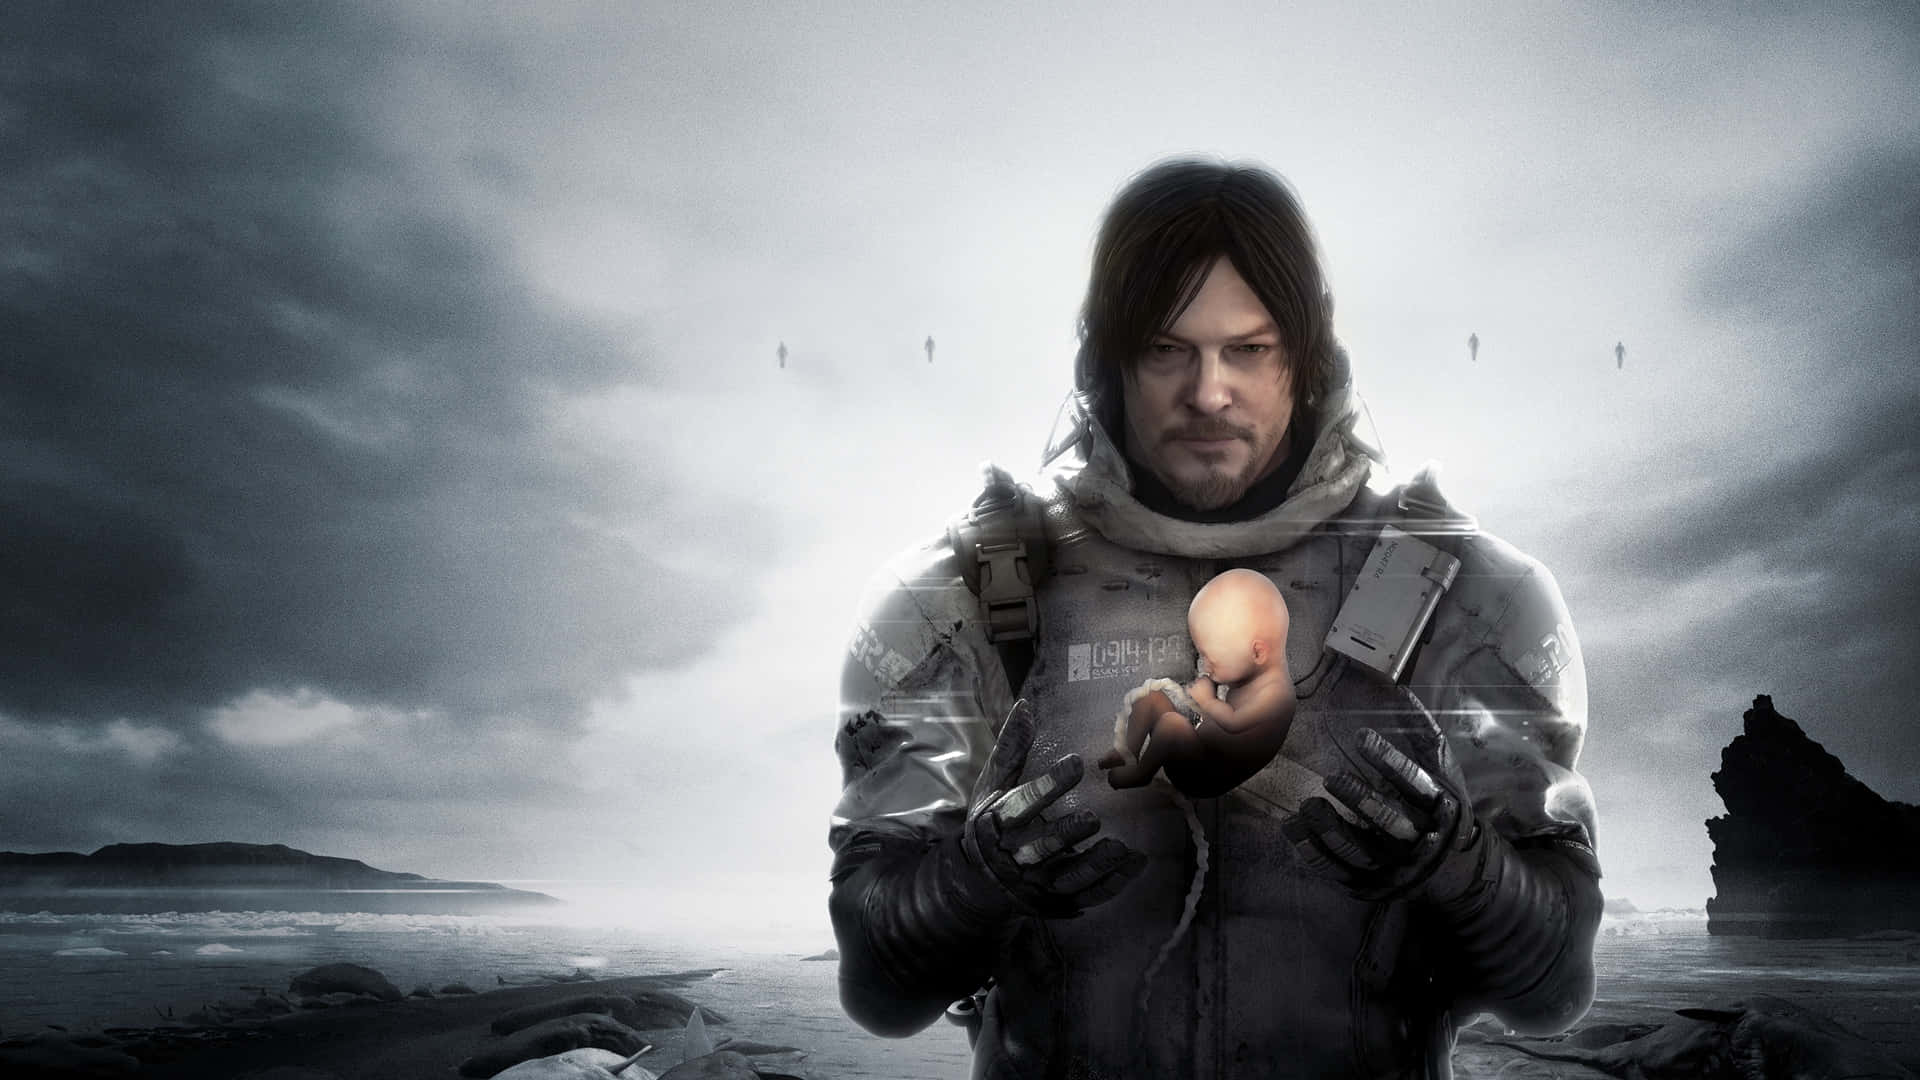 Norman Reedus With Baby Death Stranding Pc Wallpaper